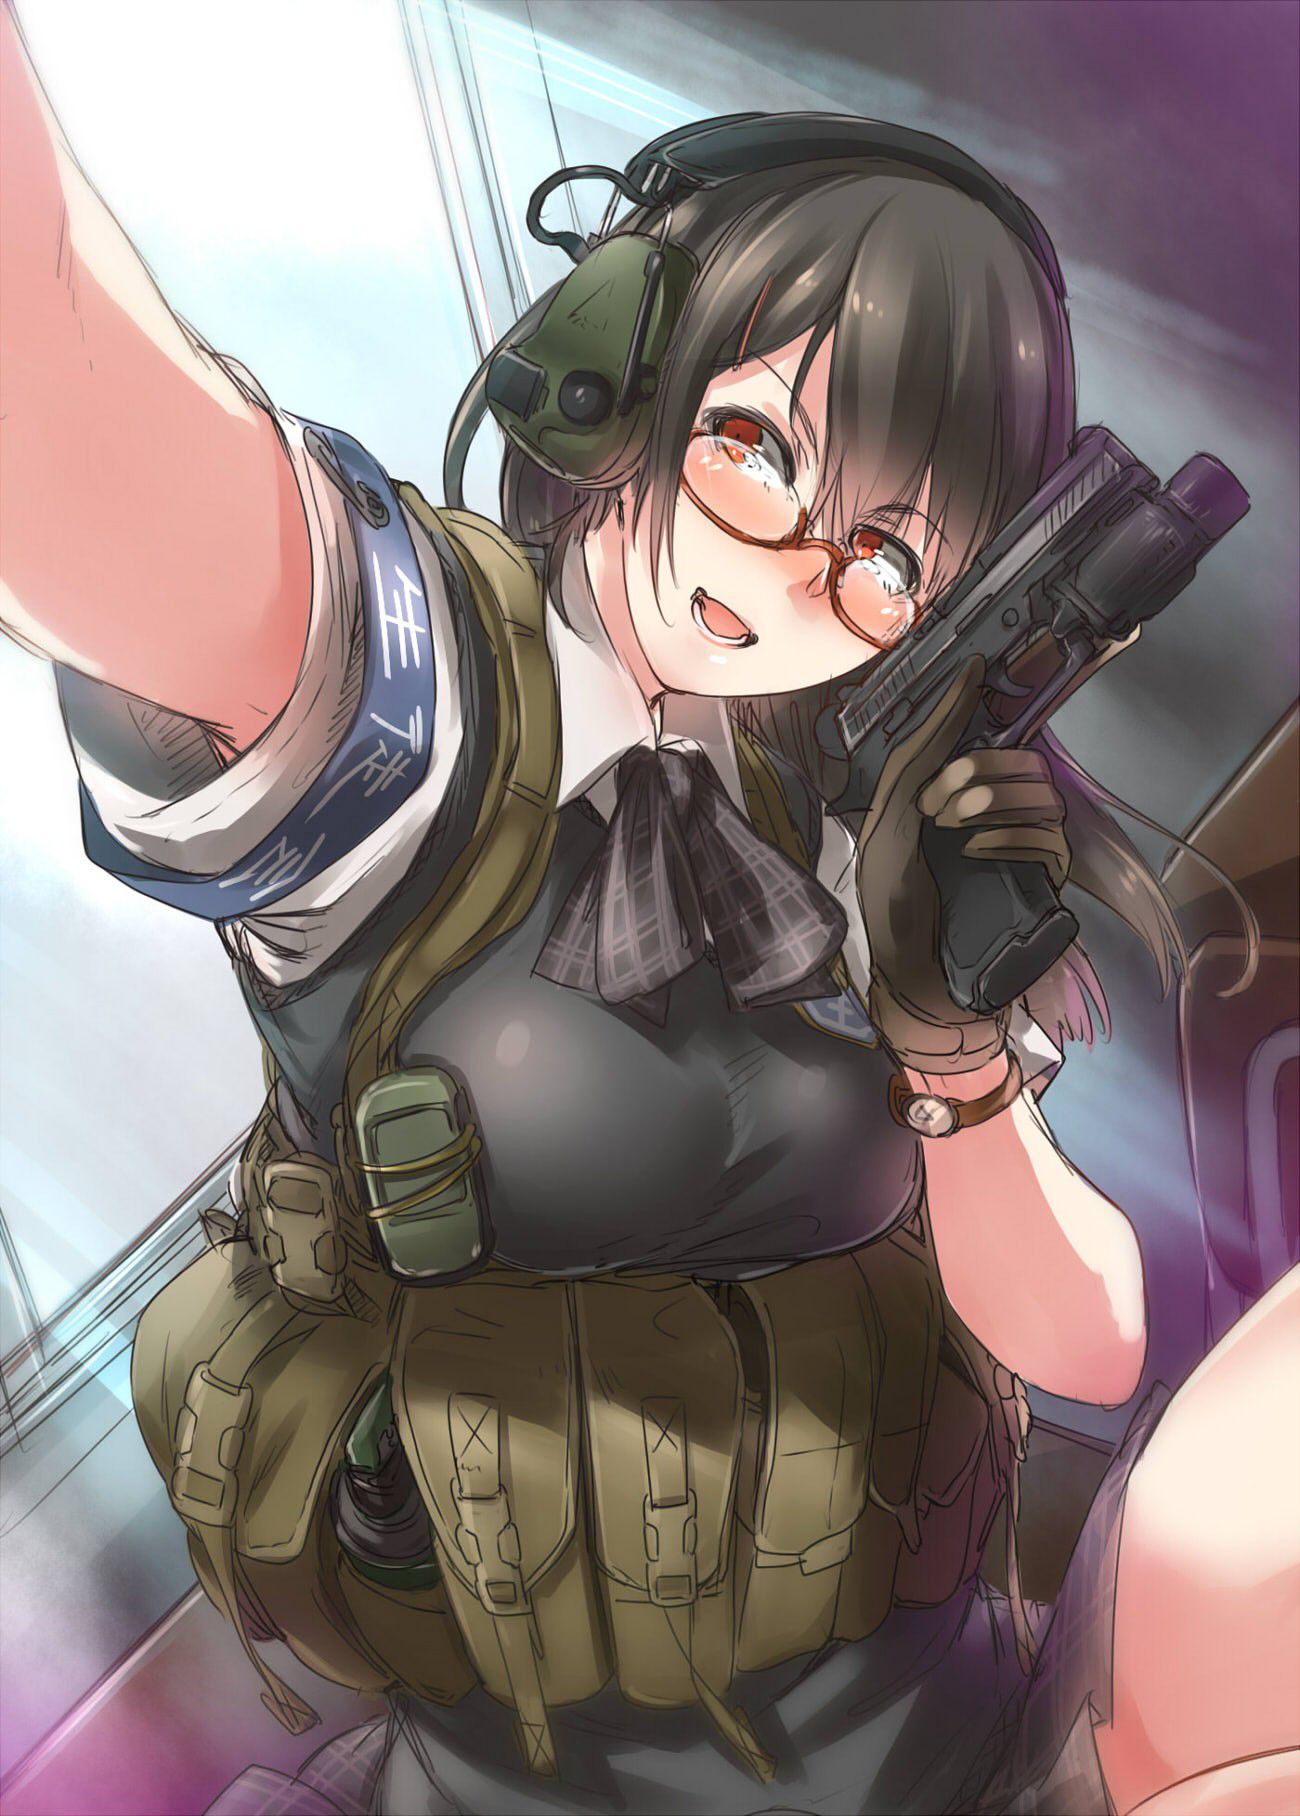 Secondary image of a pretty girl with a firearm, etc. 4 [non-erotic] 11